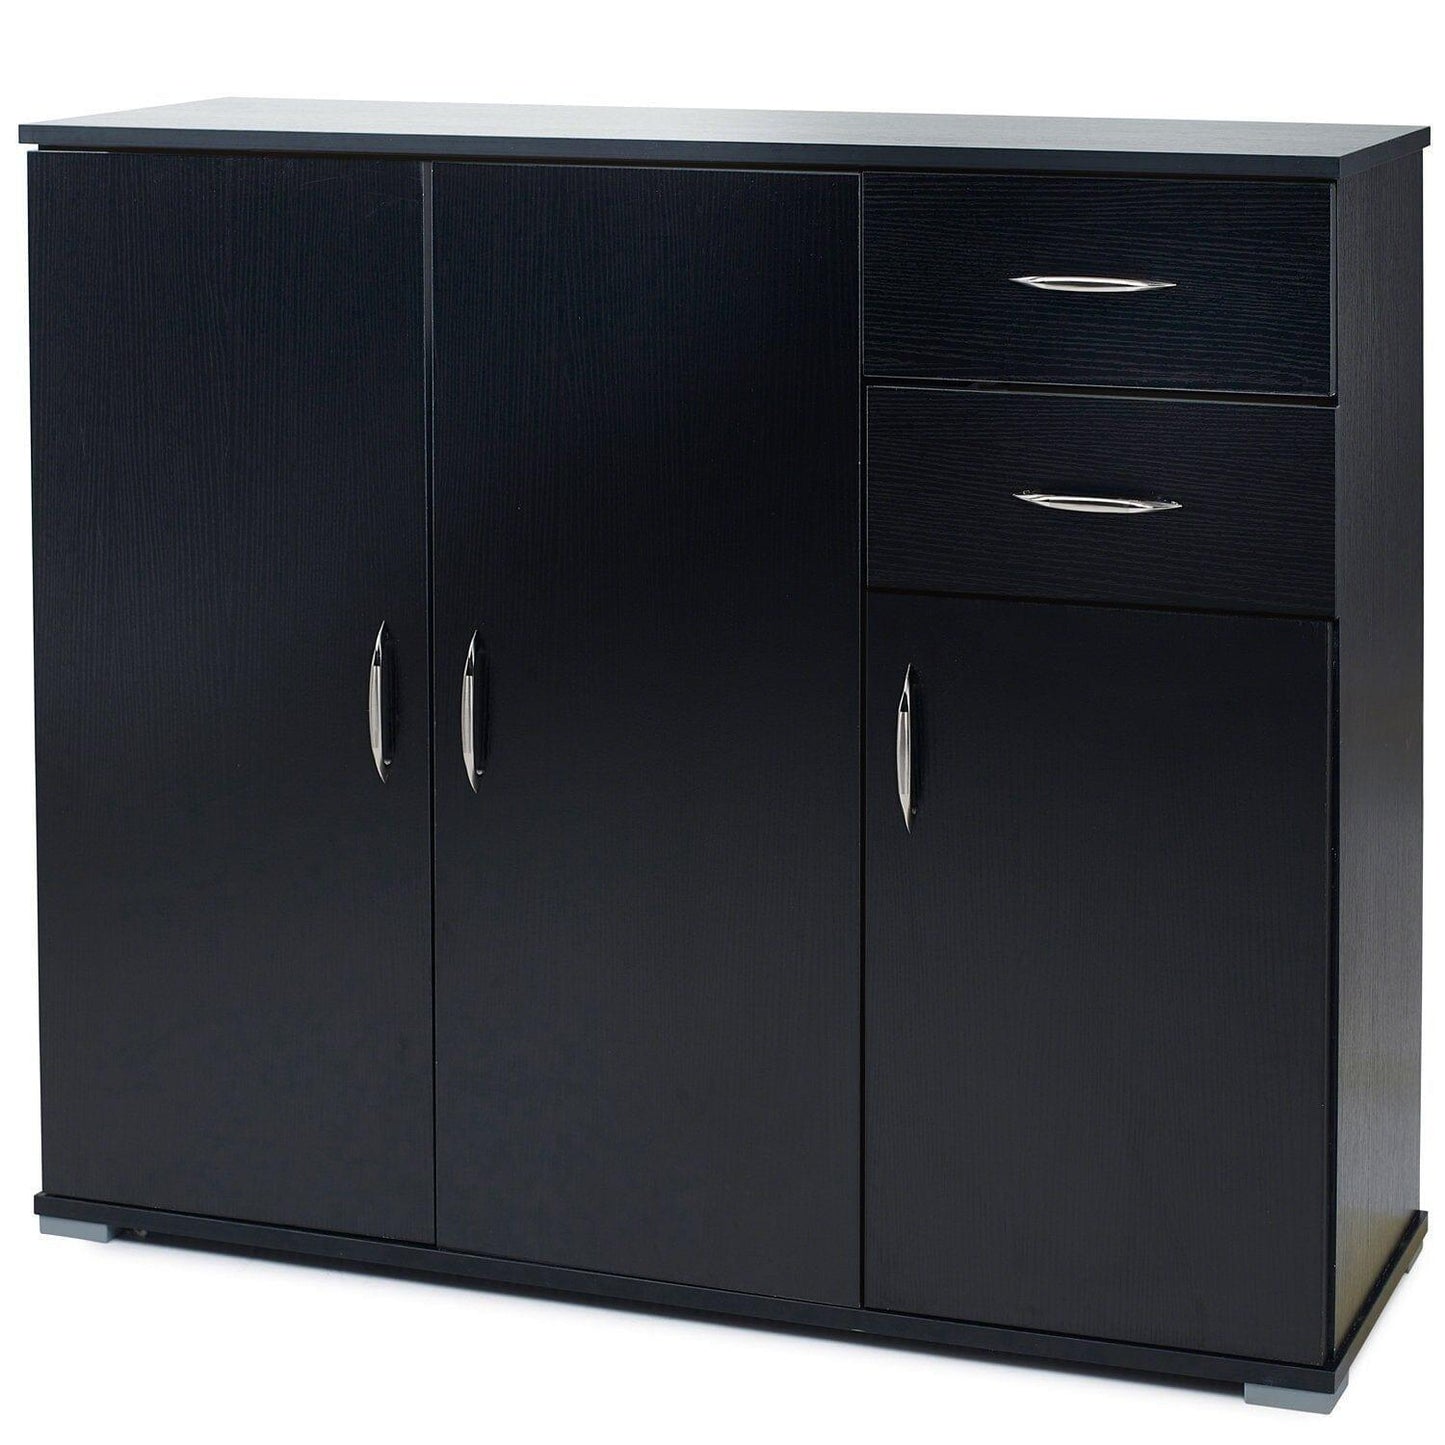 Essie Full Height Bookcase & Cabinet Office Set - Pitch Black - Laura James